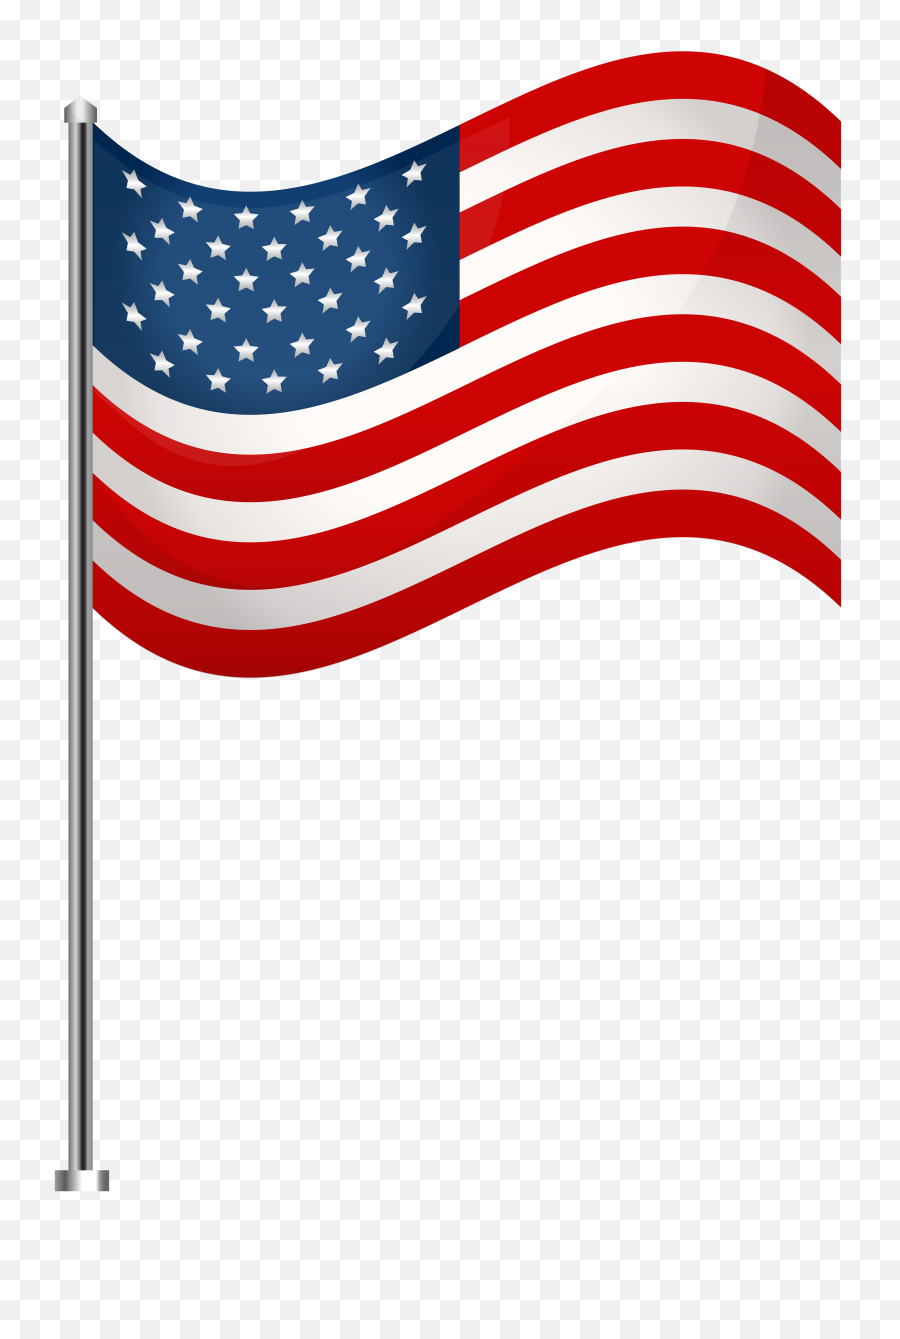 1580831564 - American Flag Clipart Png,American Flag Png Free